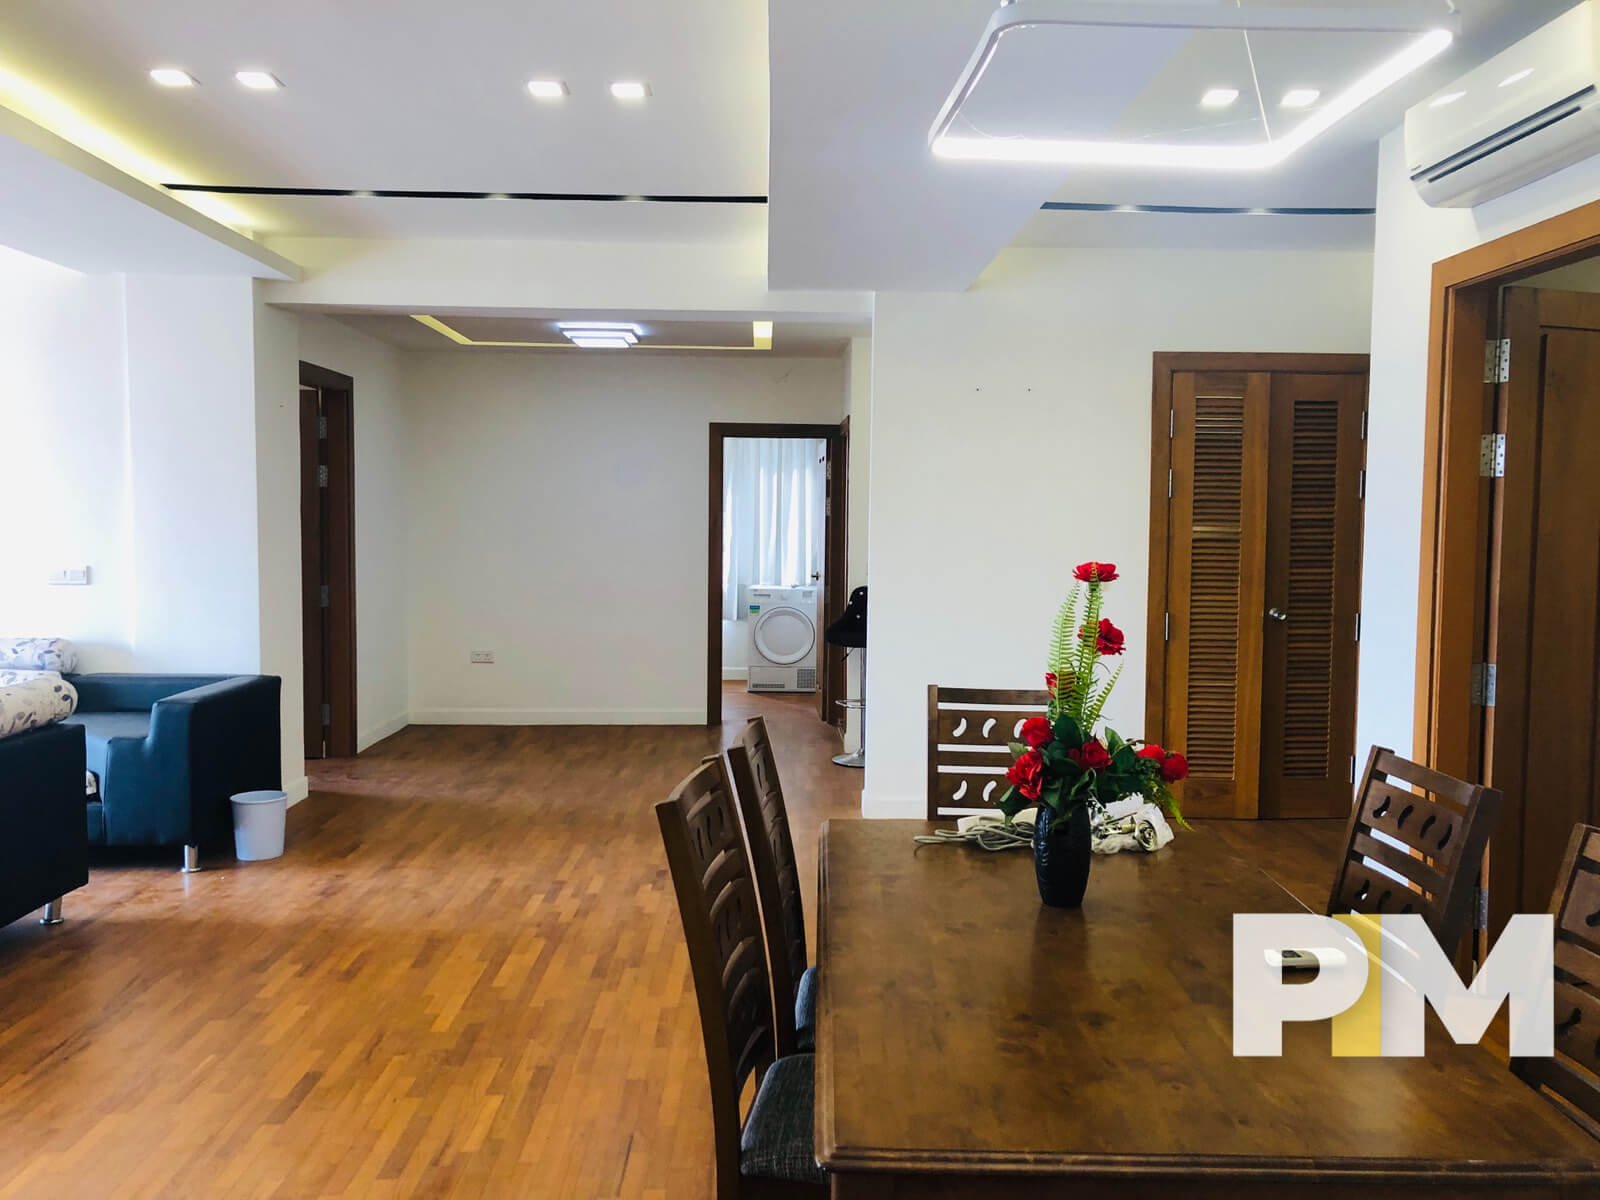 Dining table and chairs - Yangon Real Estate